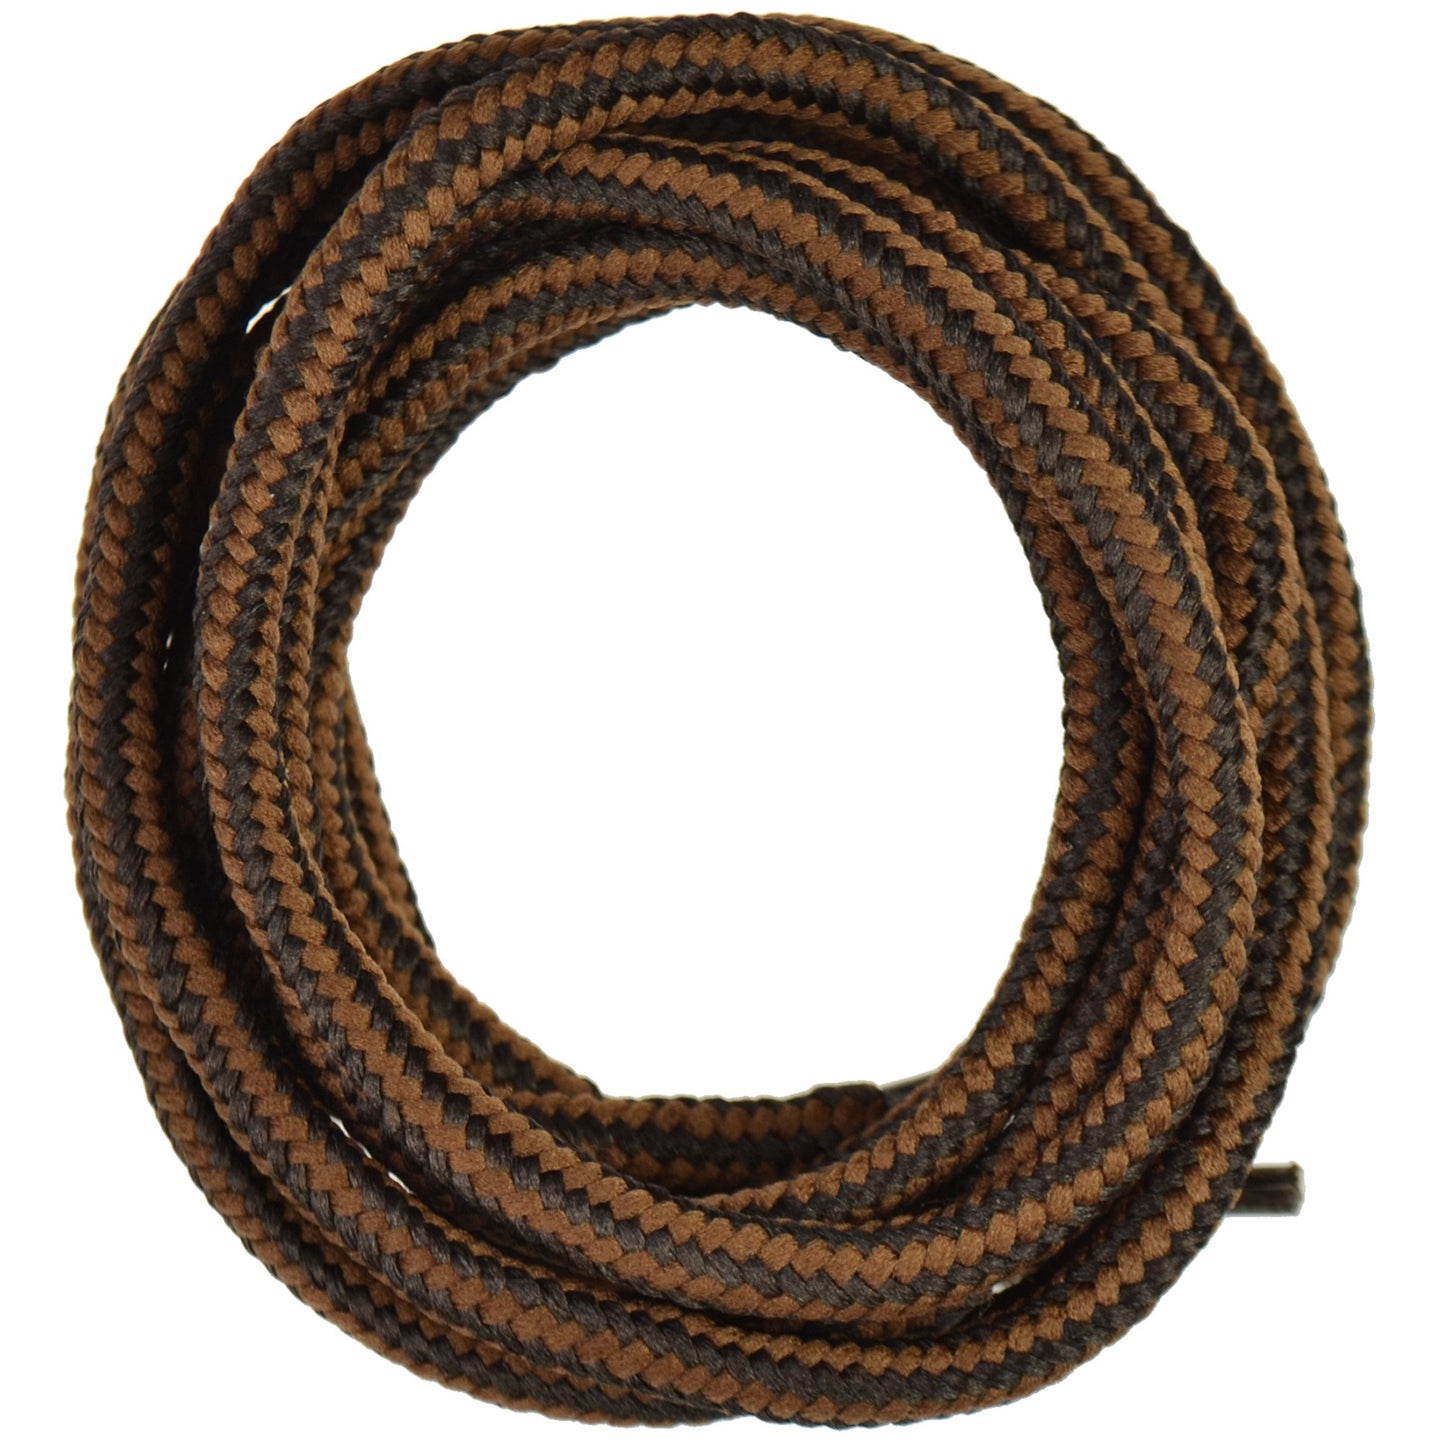 90cm Worksite Cord Work Boot Shoe Laces - Brown